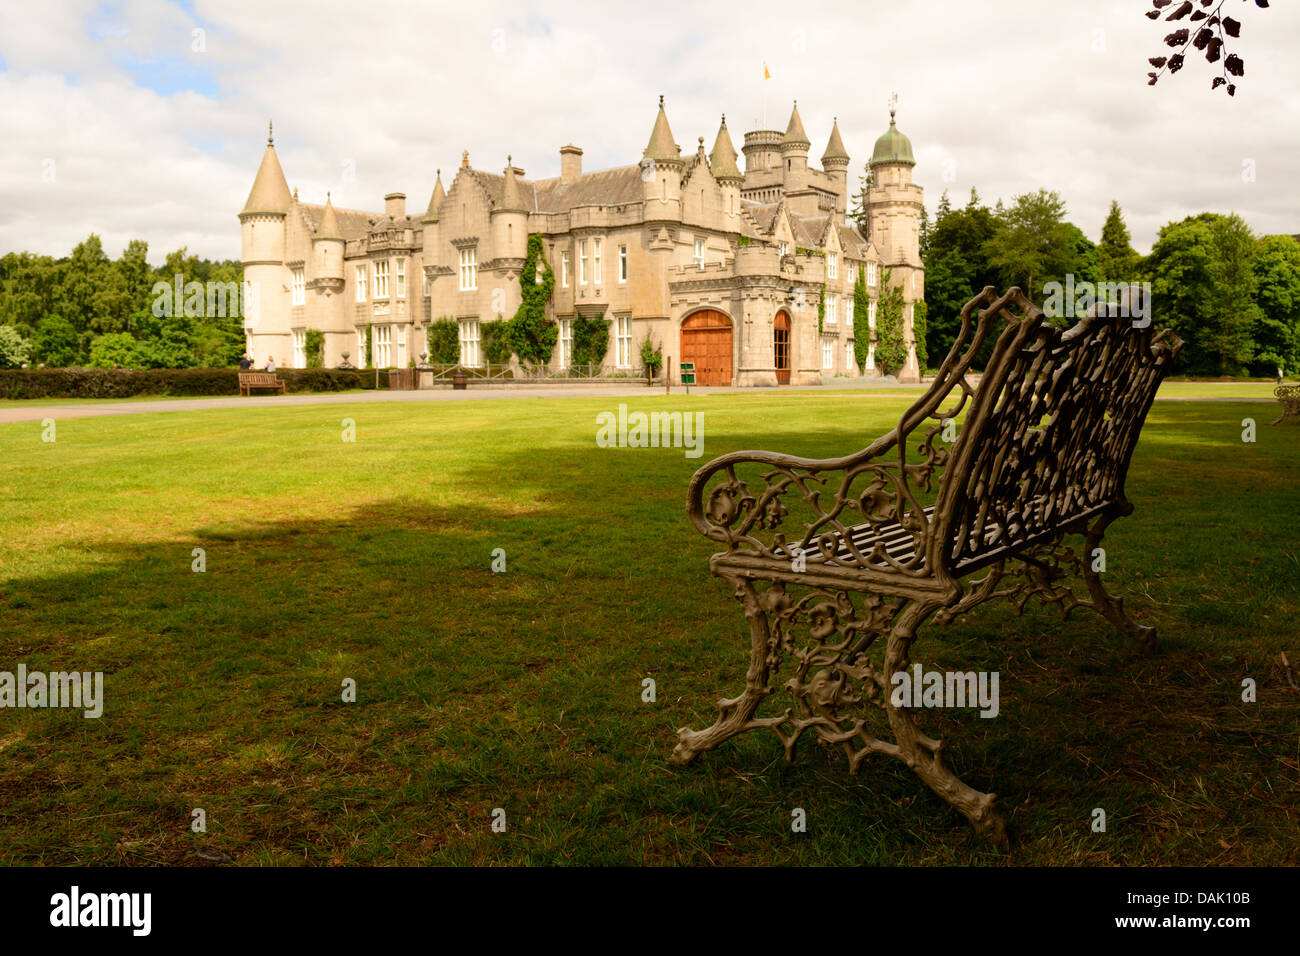 Horizontal view of Balmoral Castle, the Royal Family's summer residence, from garden on a sunny day with bench in foreground Stock Photo